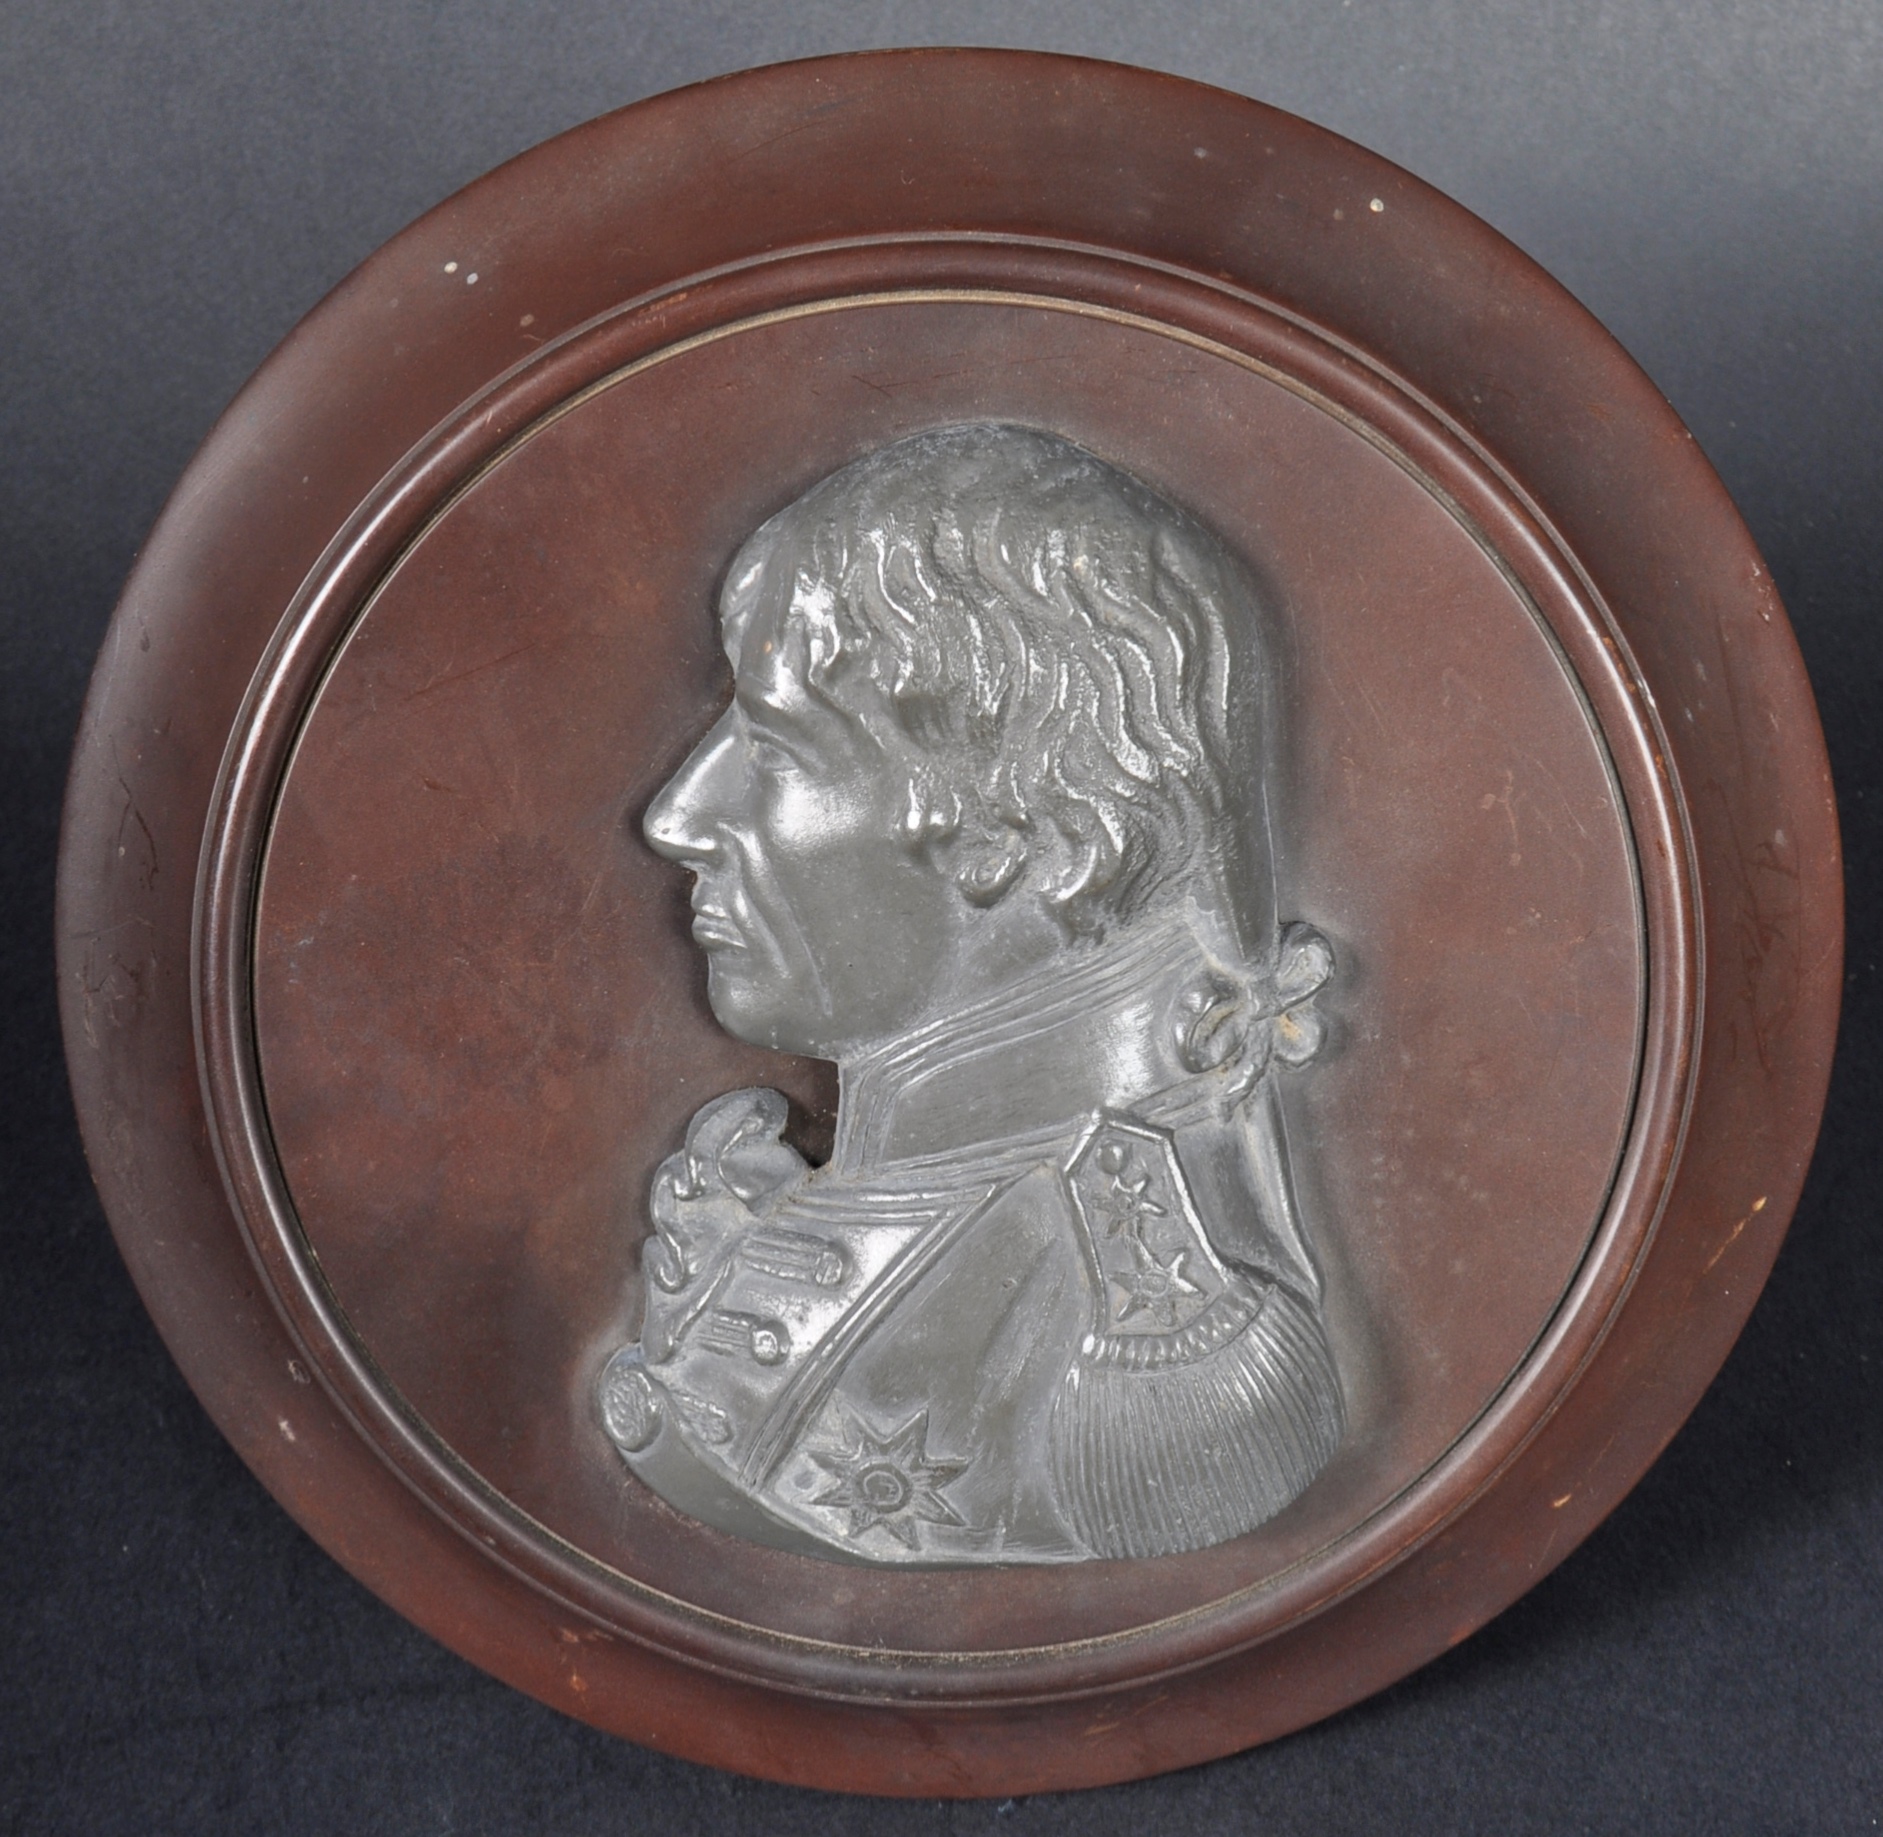 EARLY 20TH CENTURY PEWTER PORTRAIT OF LORD ADMIRAL NELSON - Image 2 of 6